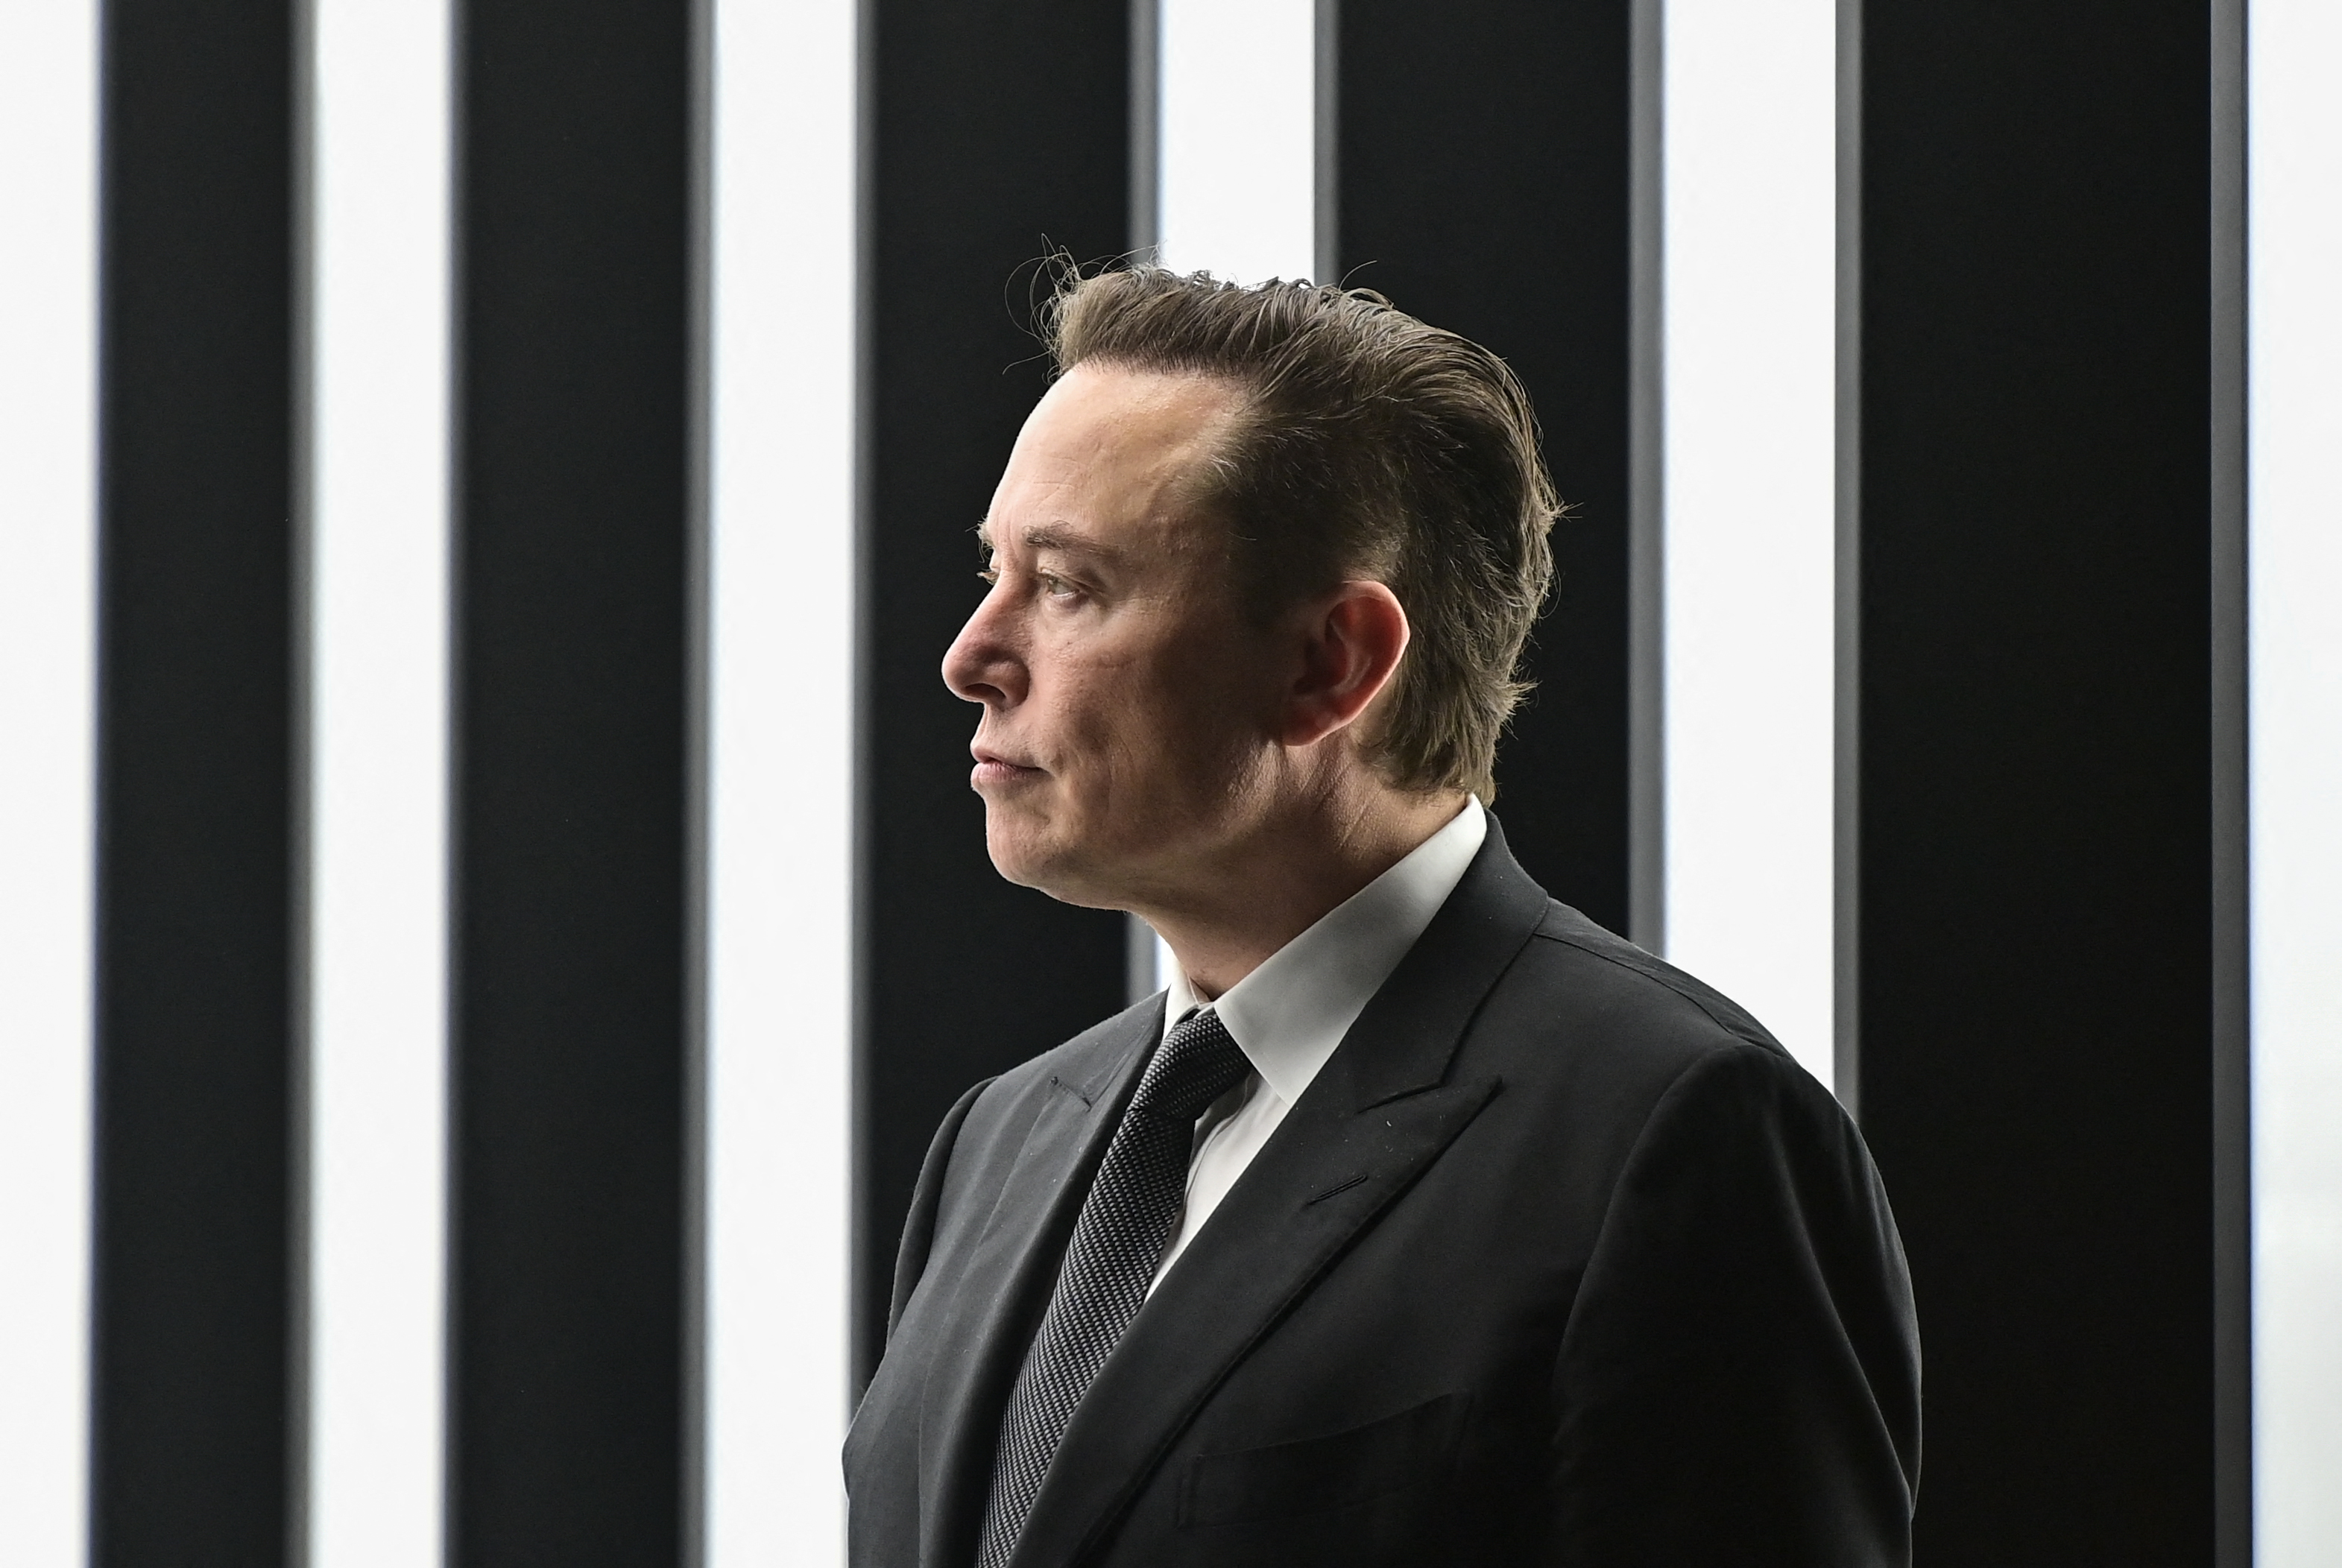 Tesla CEO Elon Musk is pictured as he attends the start of the production at Tesla's "Gigafactory"  in Gruenheide, southeast of Berlin, on March 22, 2022. (PATRICK PLEUL—AFP/Getty Images)